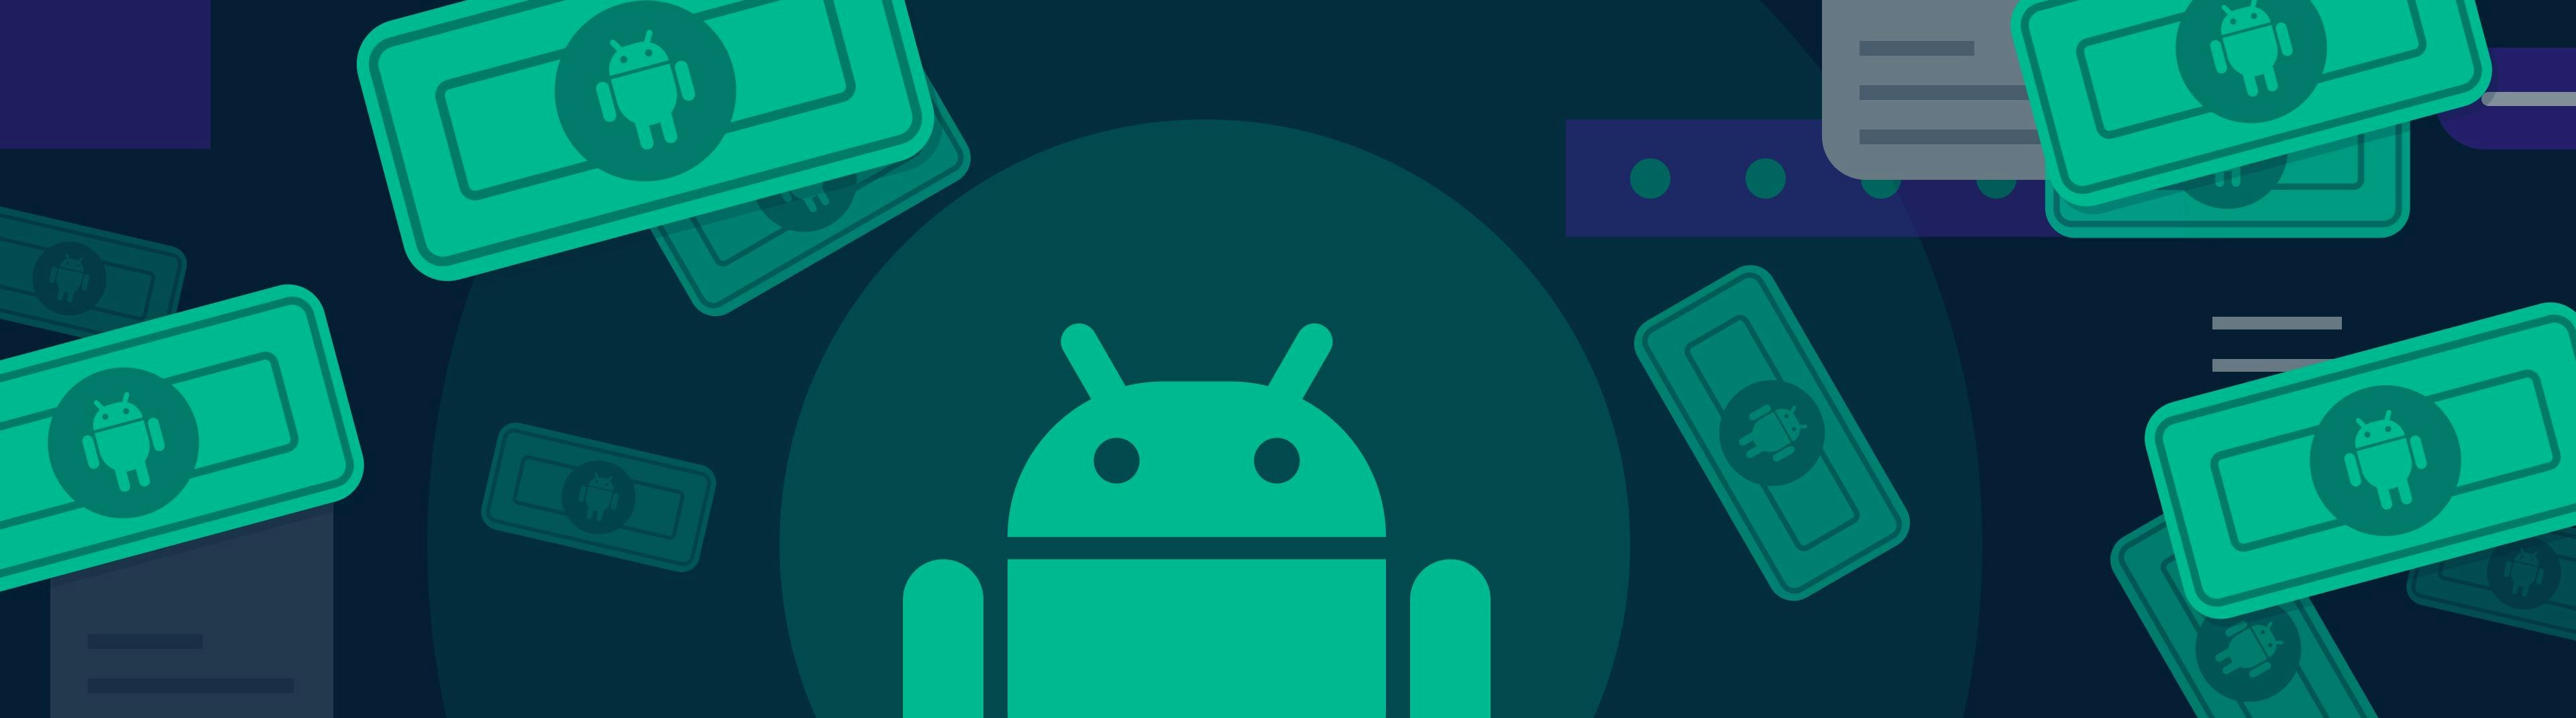 There is a big Android logo in the front, with a couple of others around it on the cards.